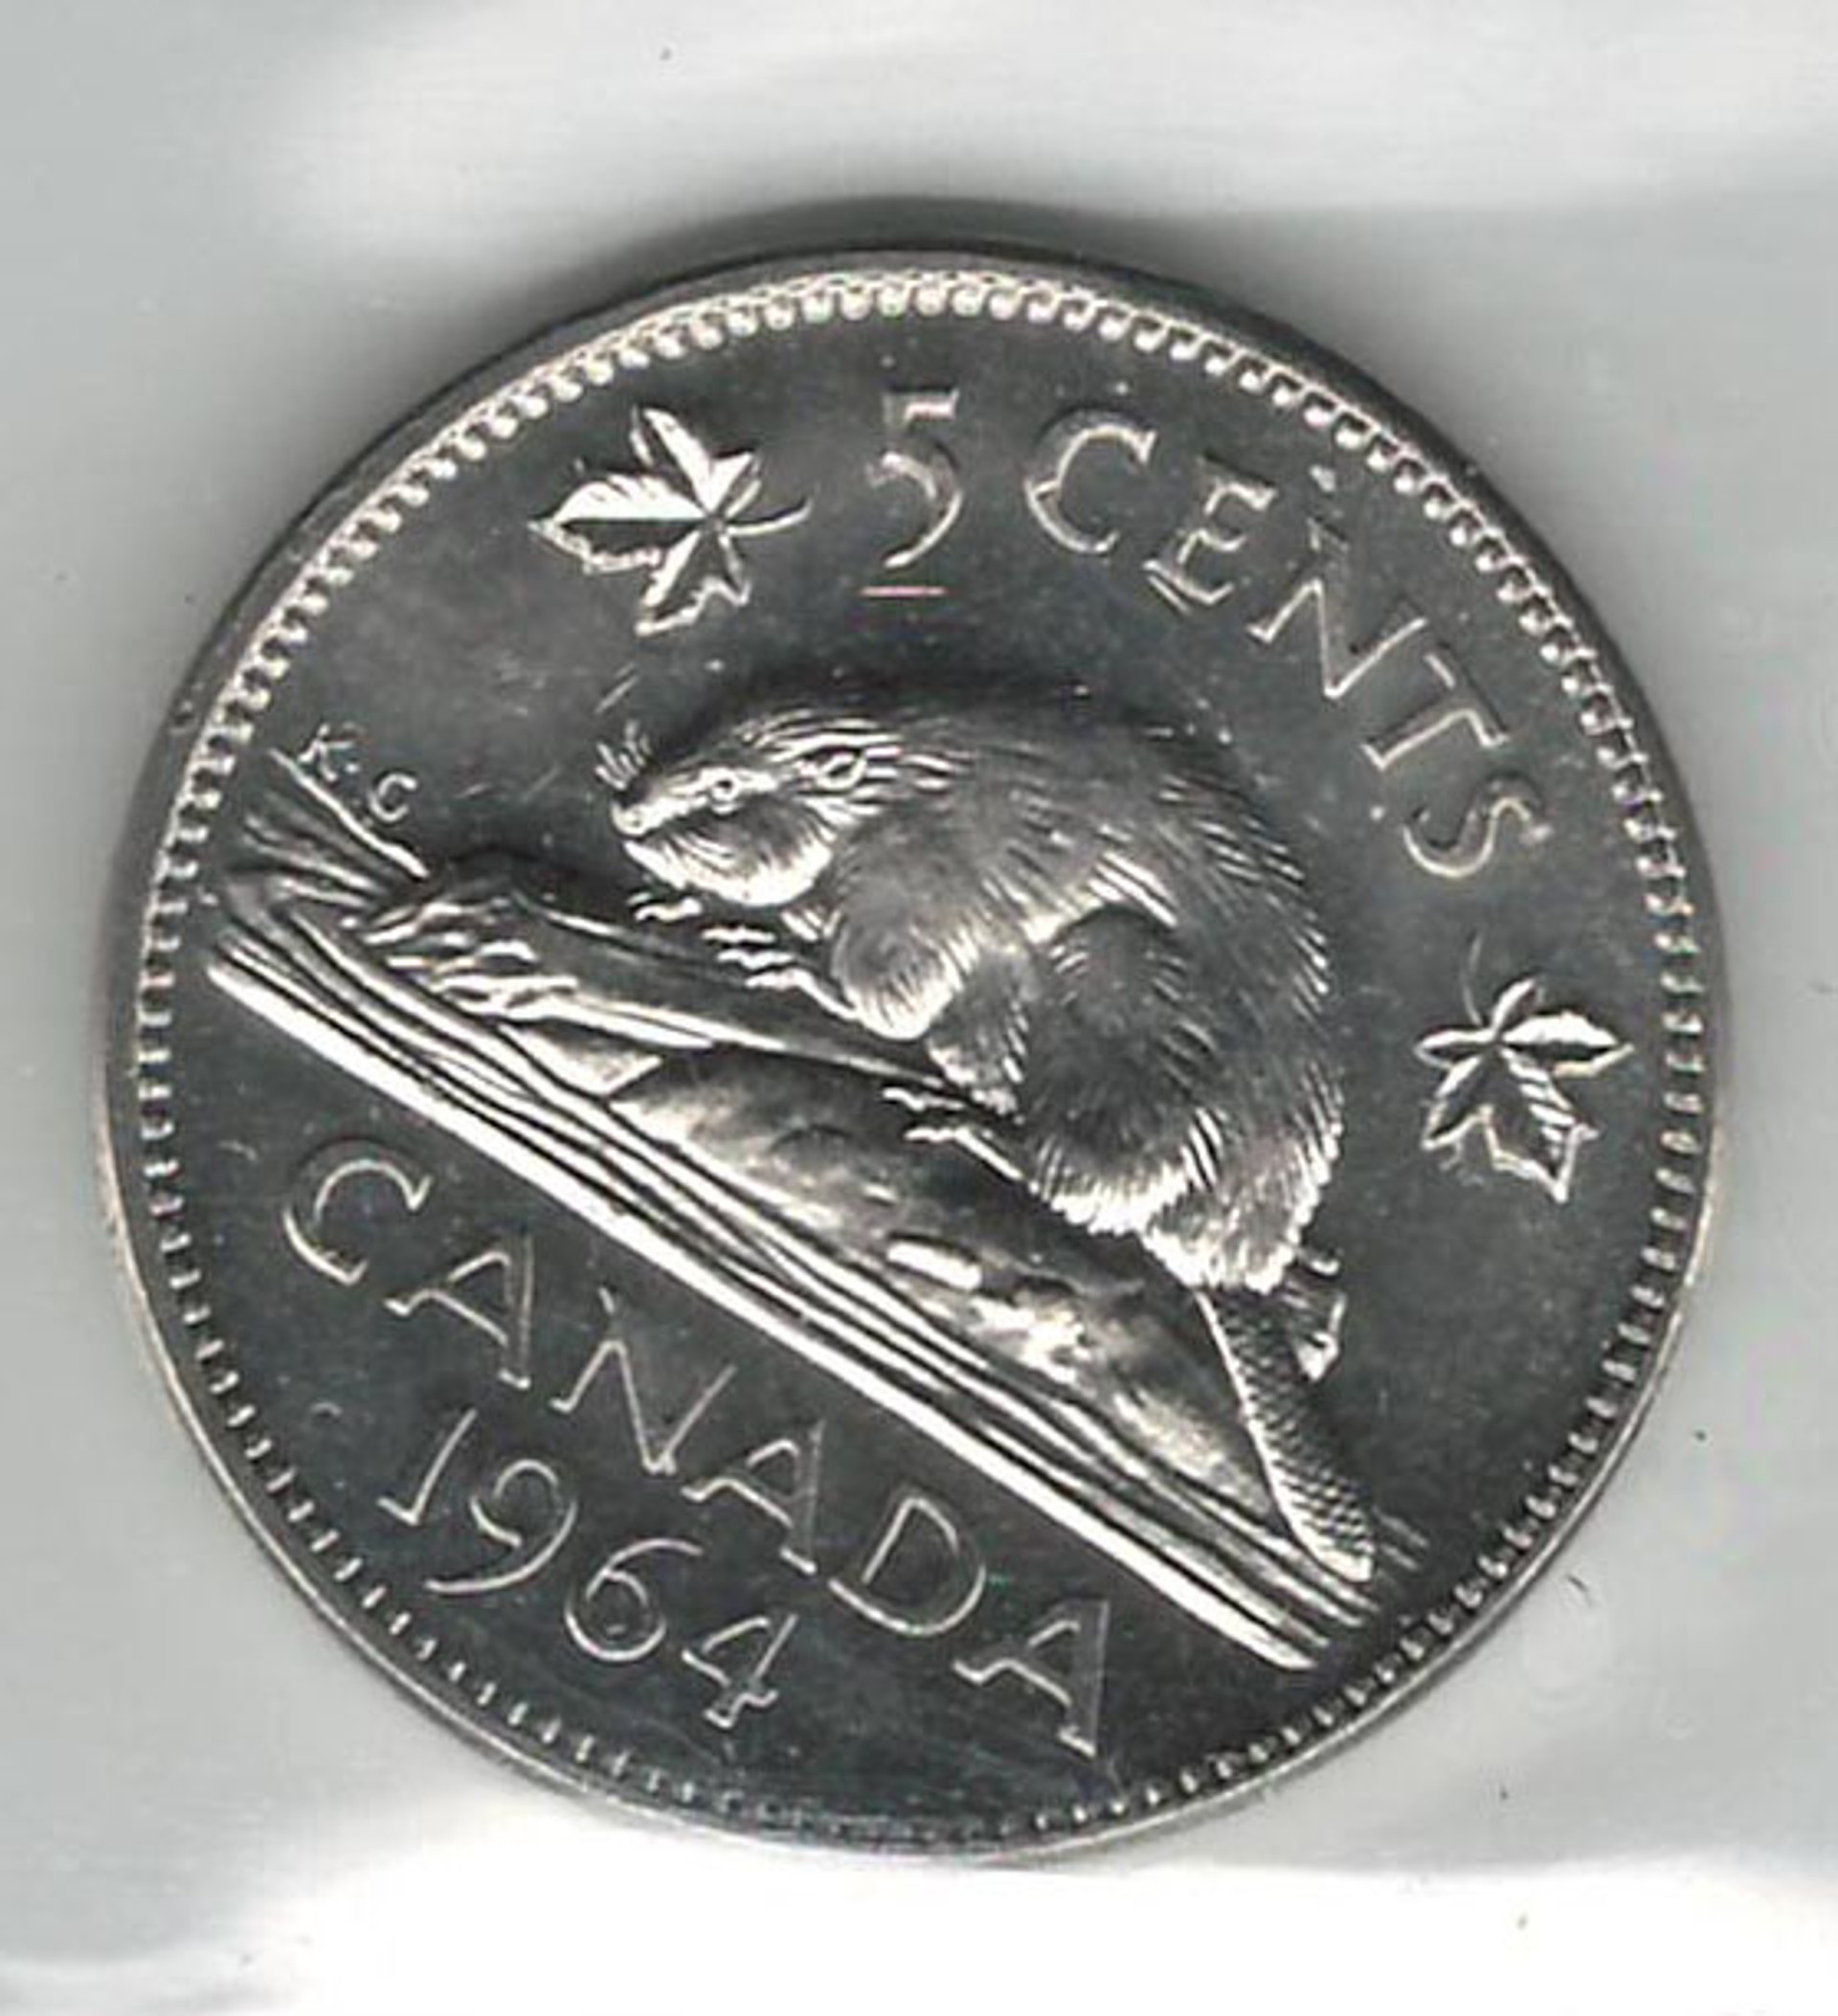 Canada: 1964 5 Cent Extra Waterline ICCS MS64 - London Coin Centre Inc.